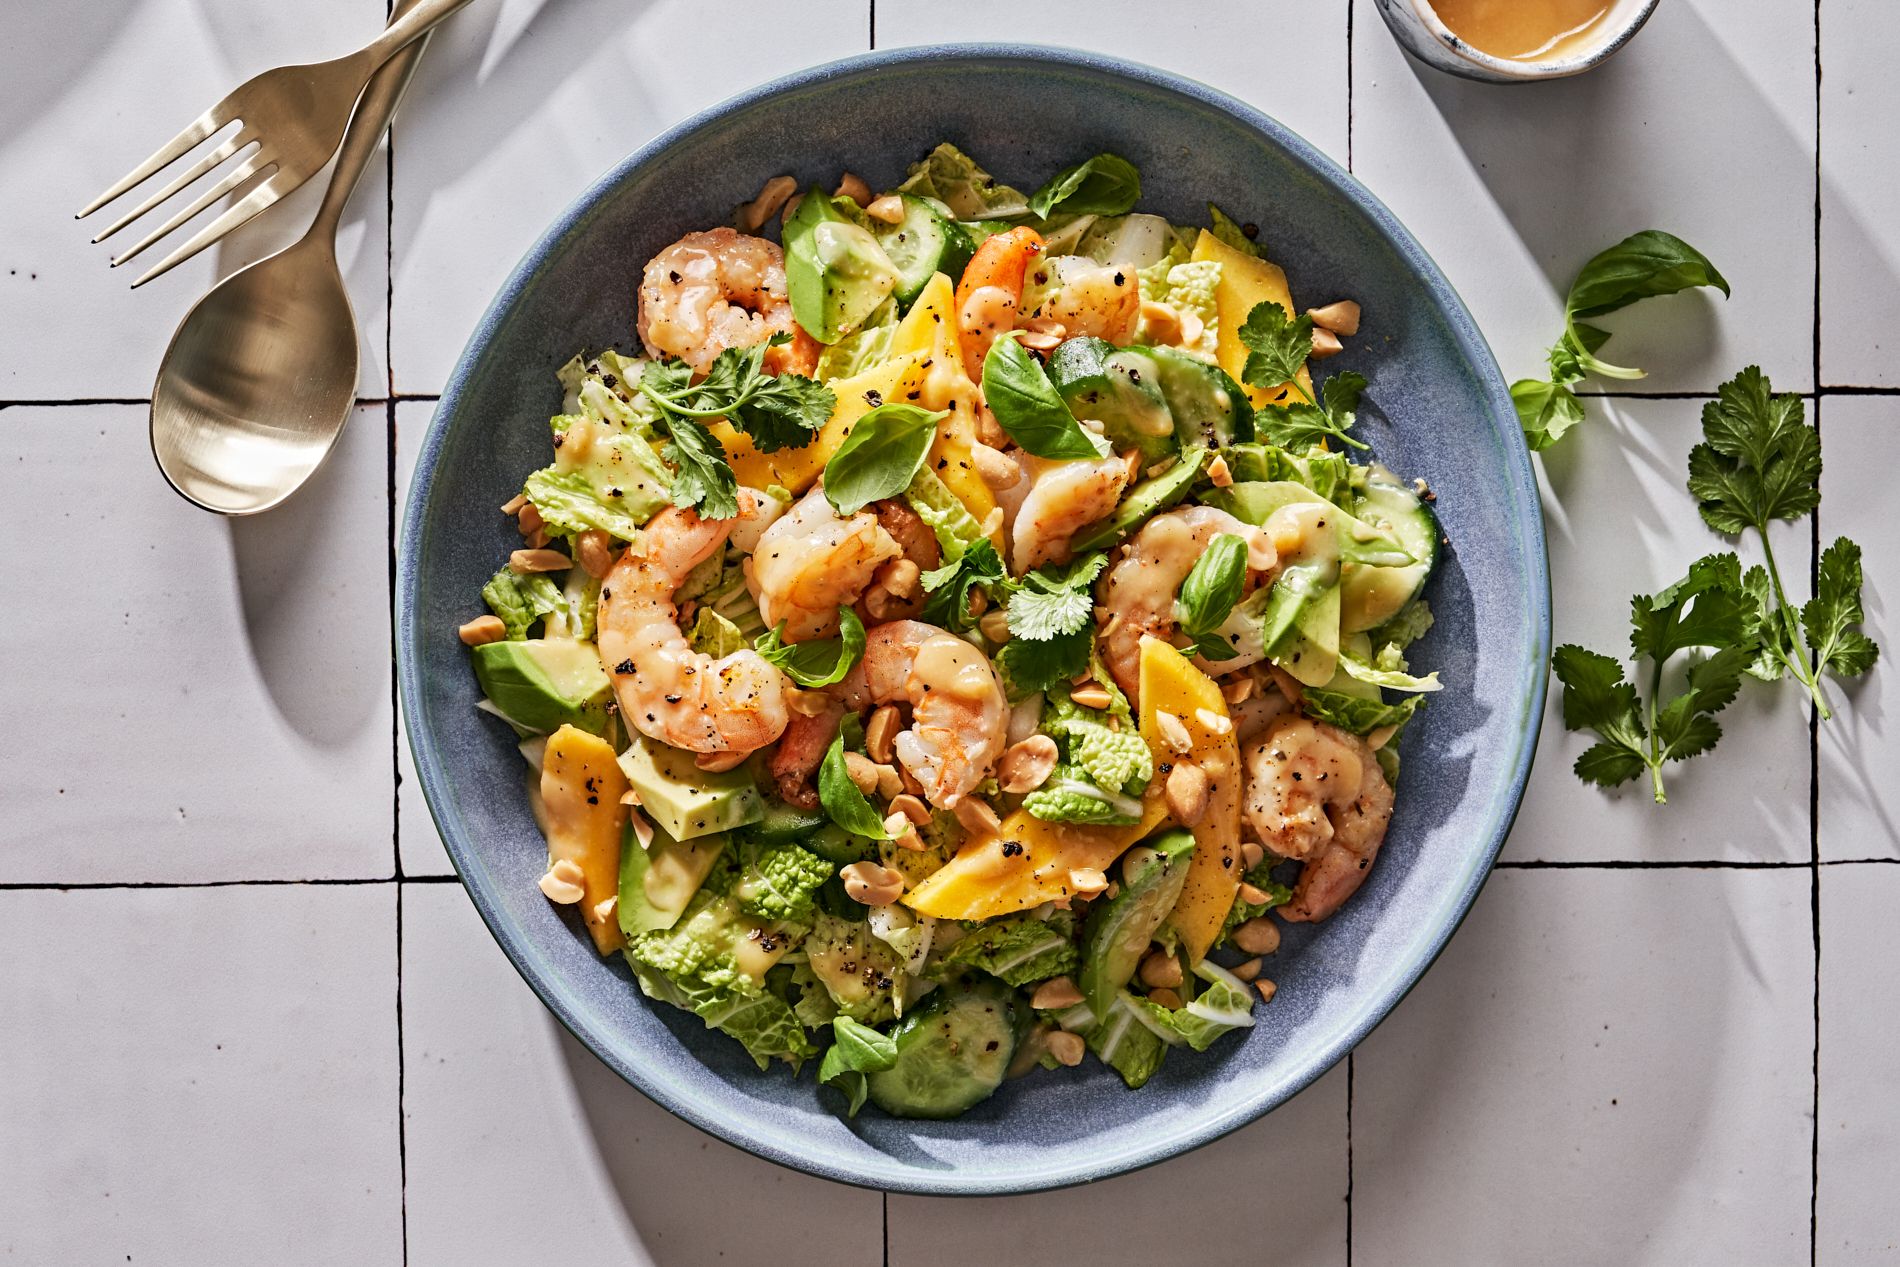 Image of a salad bowl with shrimp, avocado, and veggies on a table